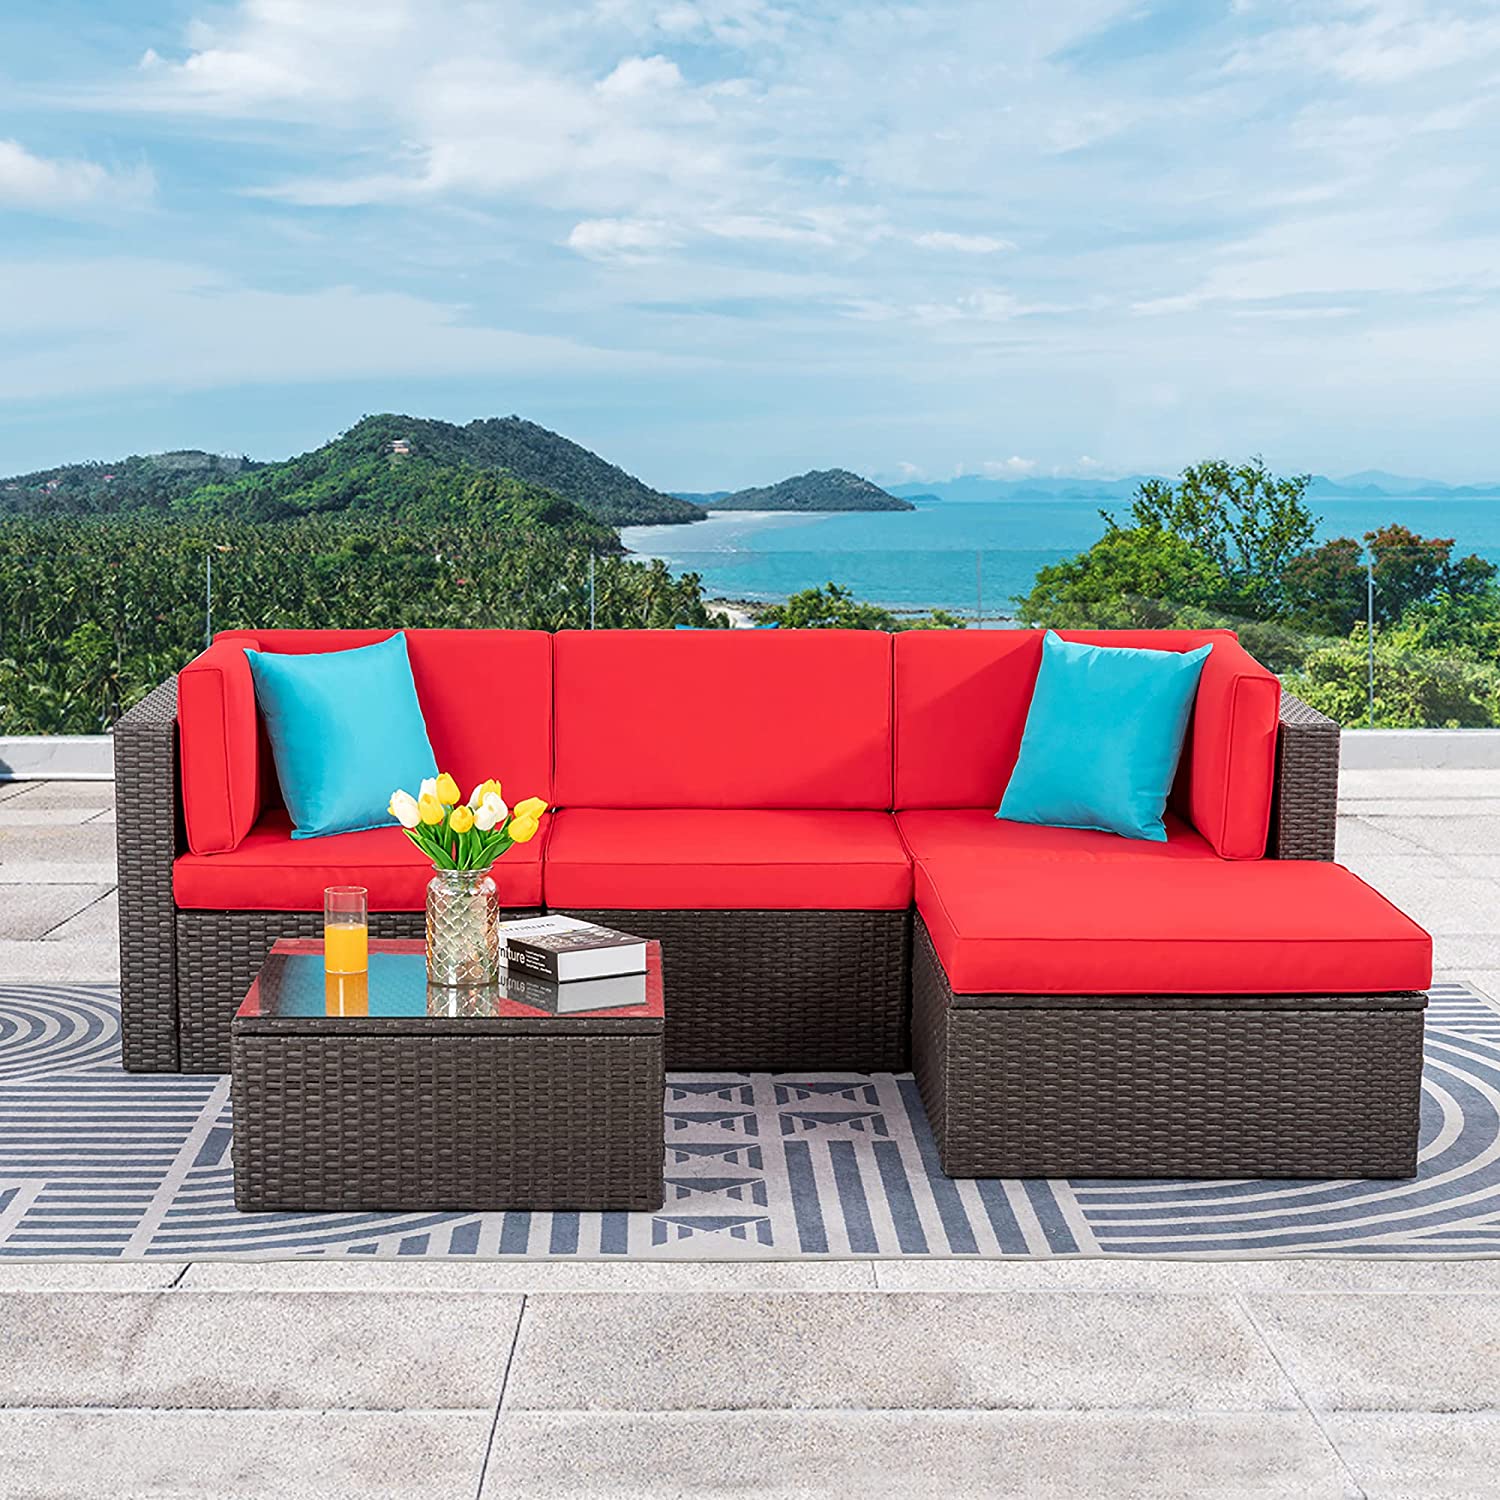 Sobaniilo 5 Pieces Patio Sectional Sofa Sets, All-Weather Outdoor Rattan Conversation Set for Garden Patio Sofa with Ottoman and Glass Table, Red - image 2 of 7